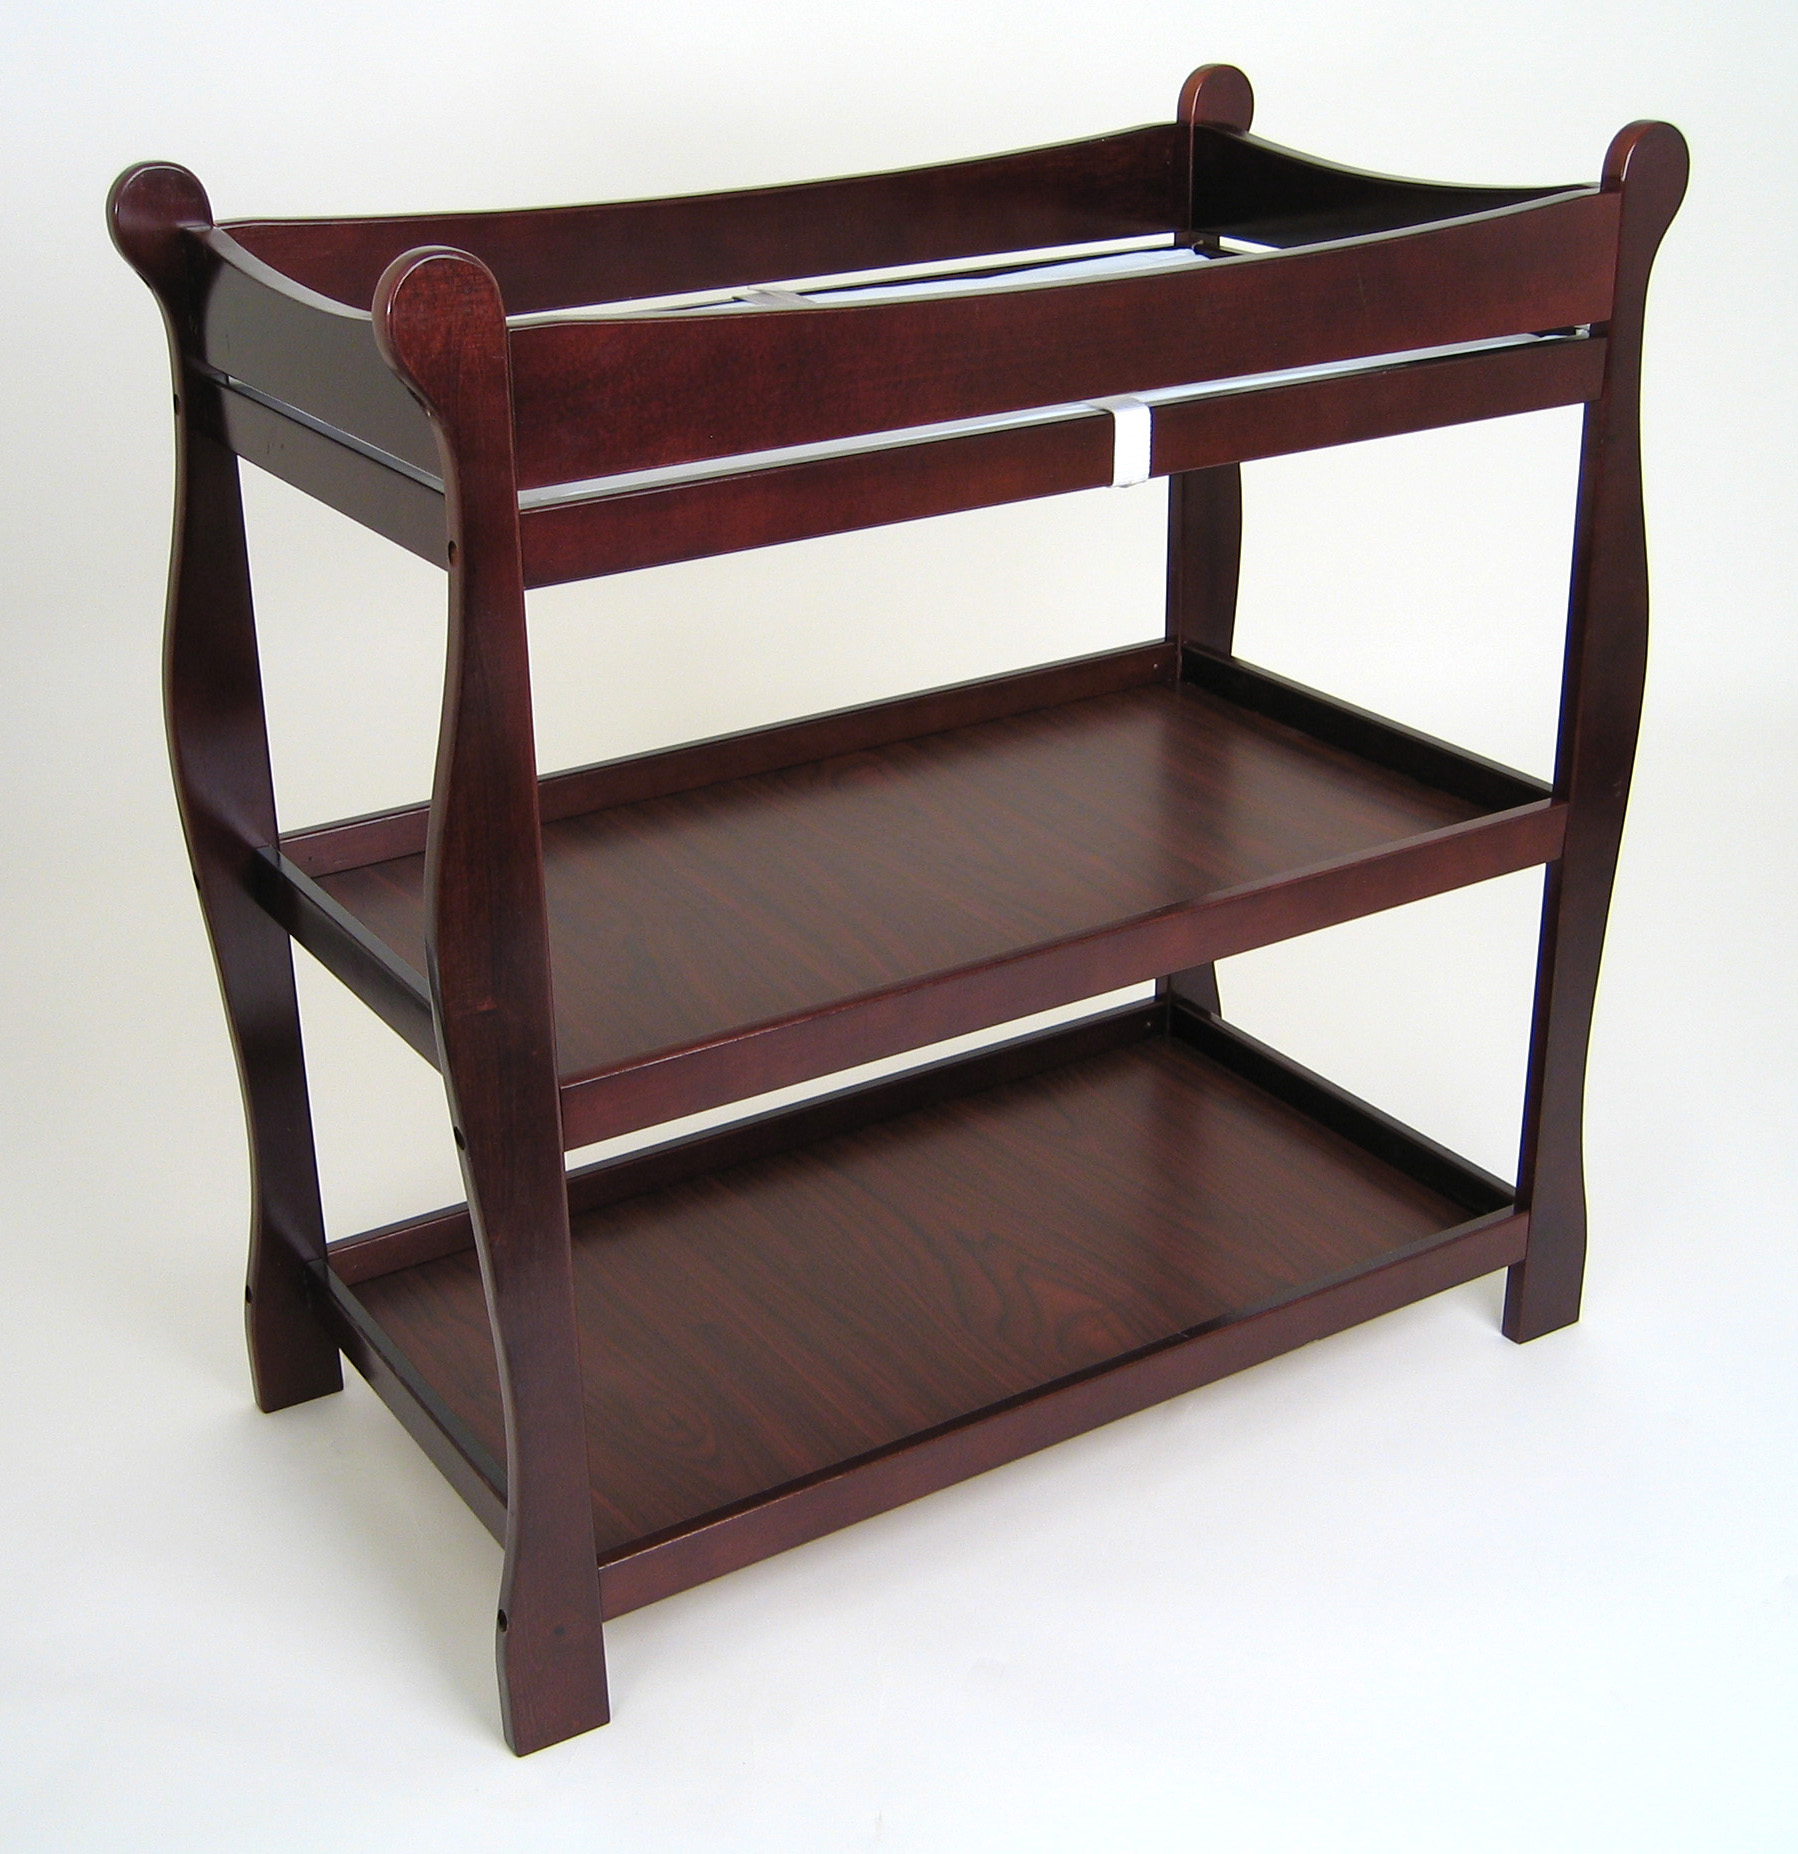 Sleigh Style Baby Changing Table - Cherry